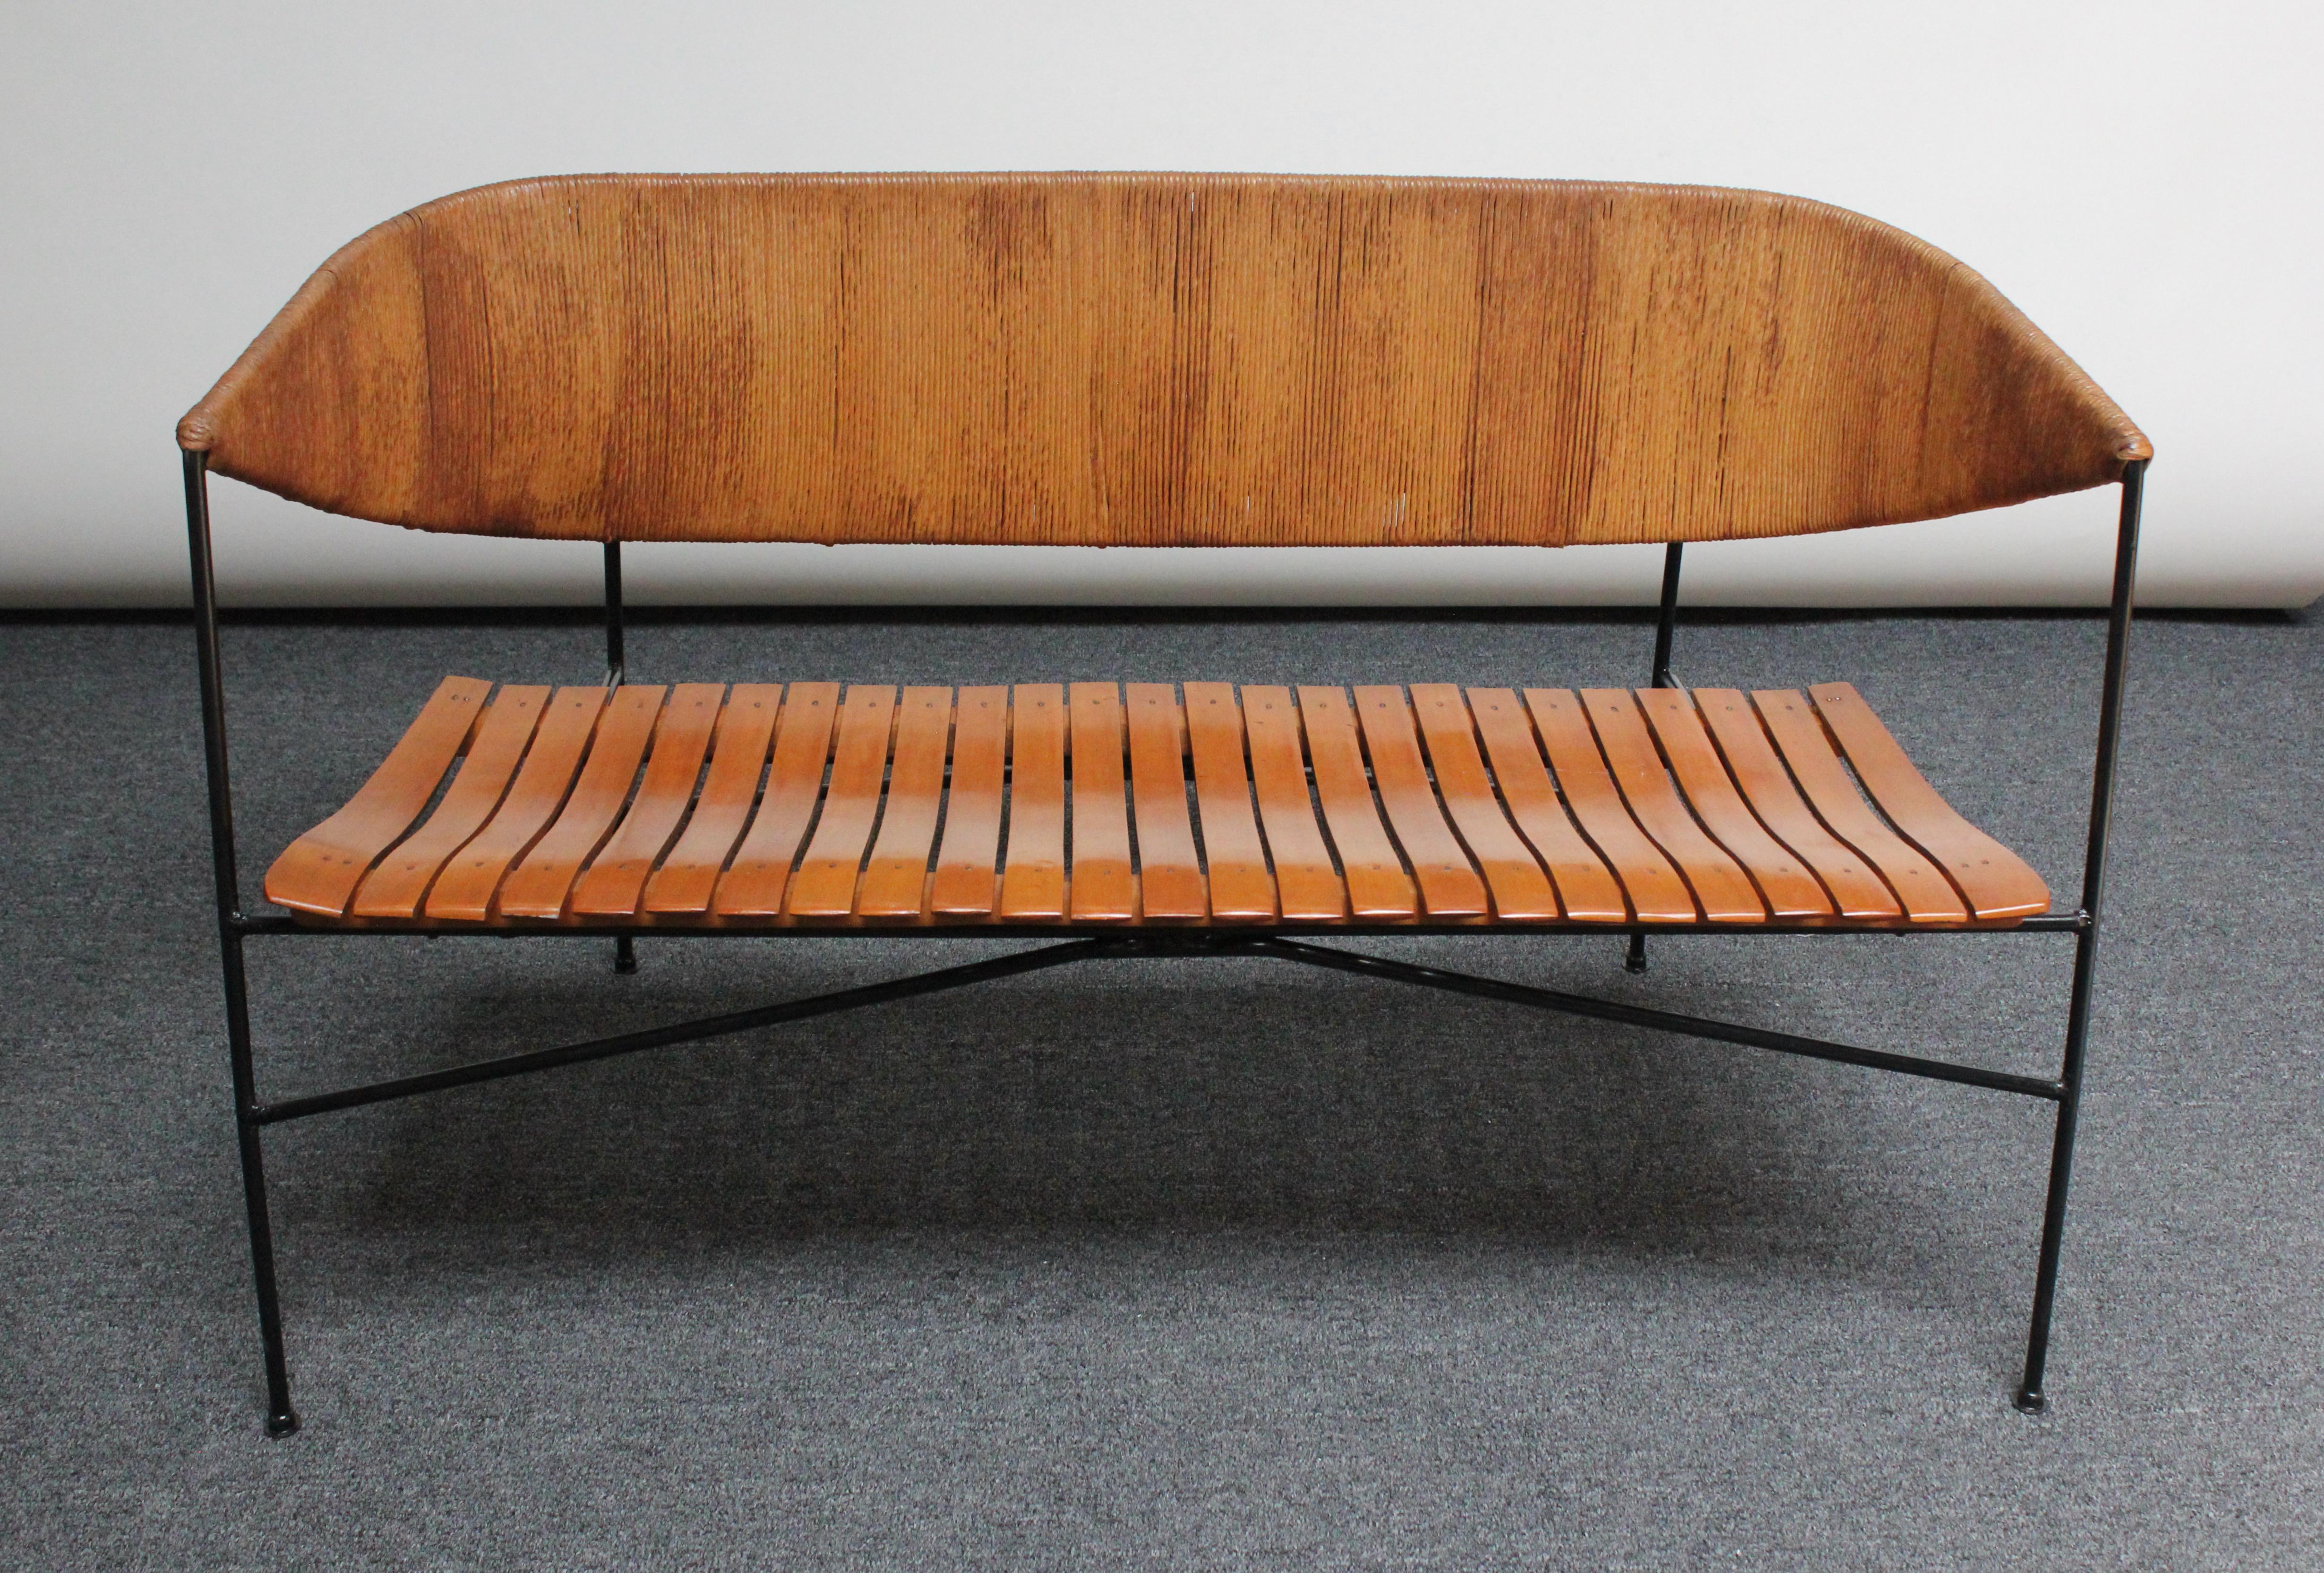 Uncommon Arthur Umanoff for Shaver Howard bench / settee composed of a wrought iron frame with rush back and stained birch-slatted seat. Dramatic, clean lines and modernist form, showing well from all angles. 
Rush is in original condition boasting